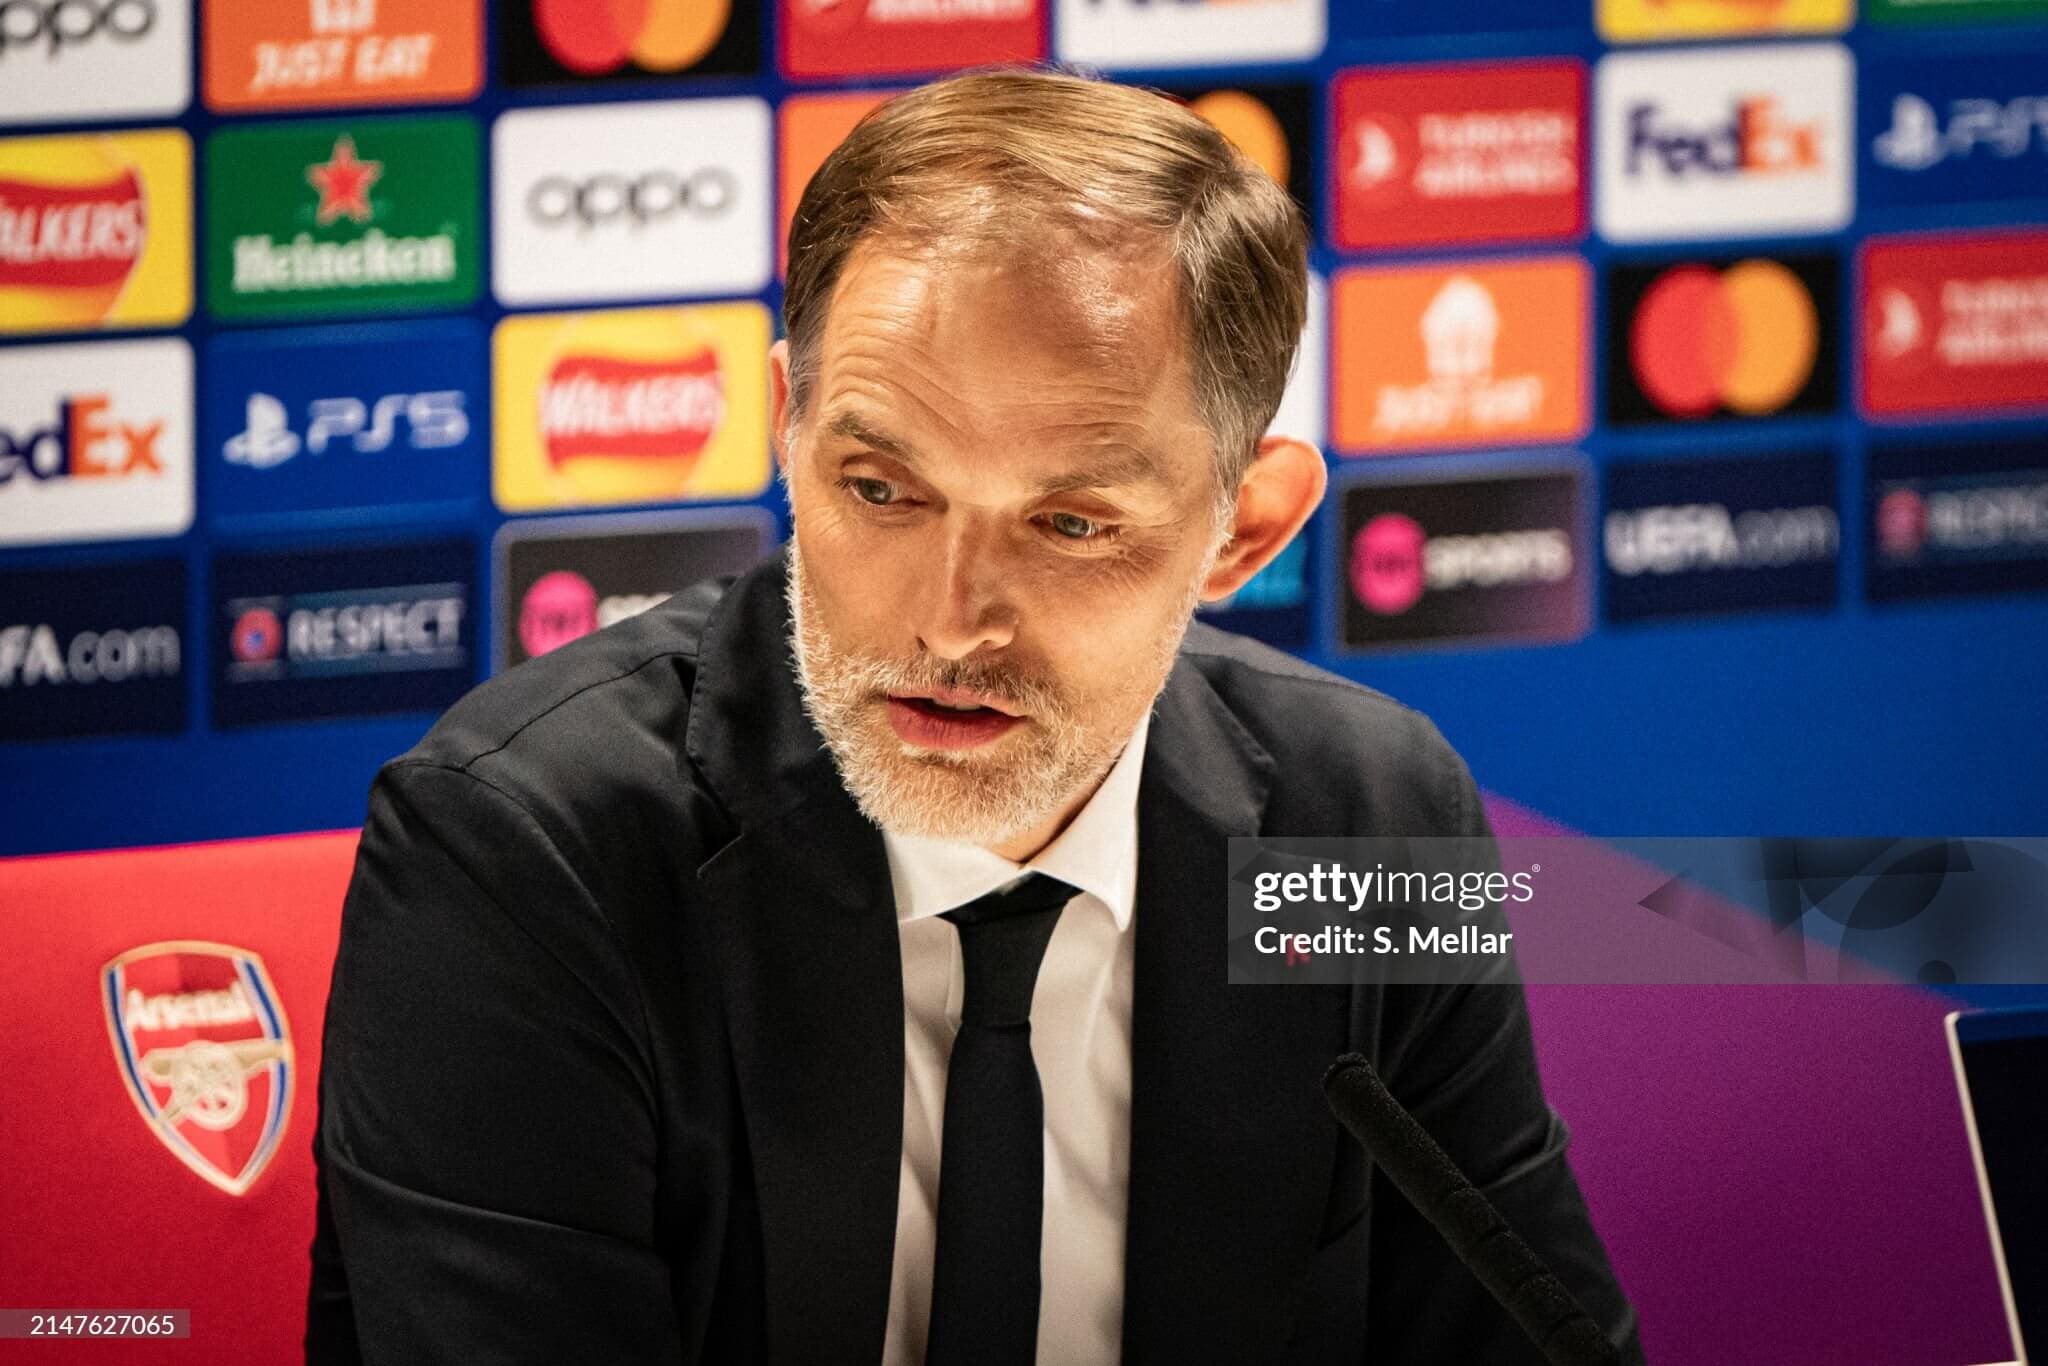 Thomas Tuchel in a press conference discussing about Arsenal's game